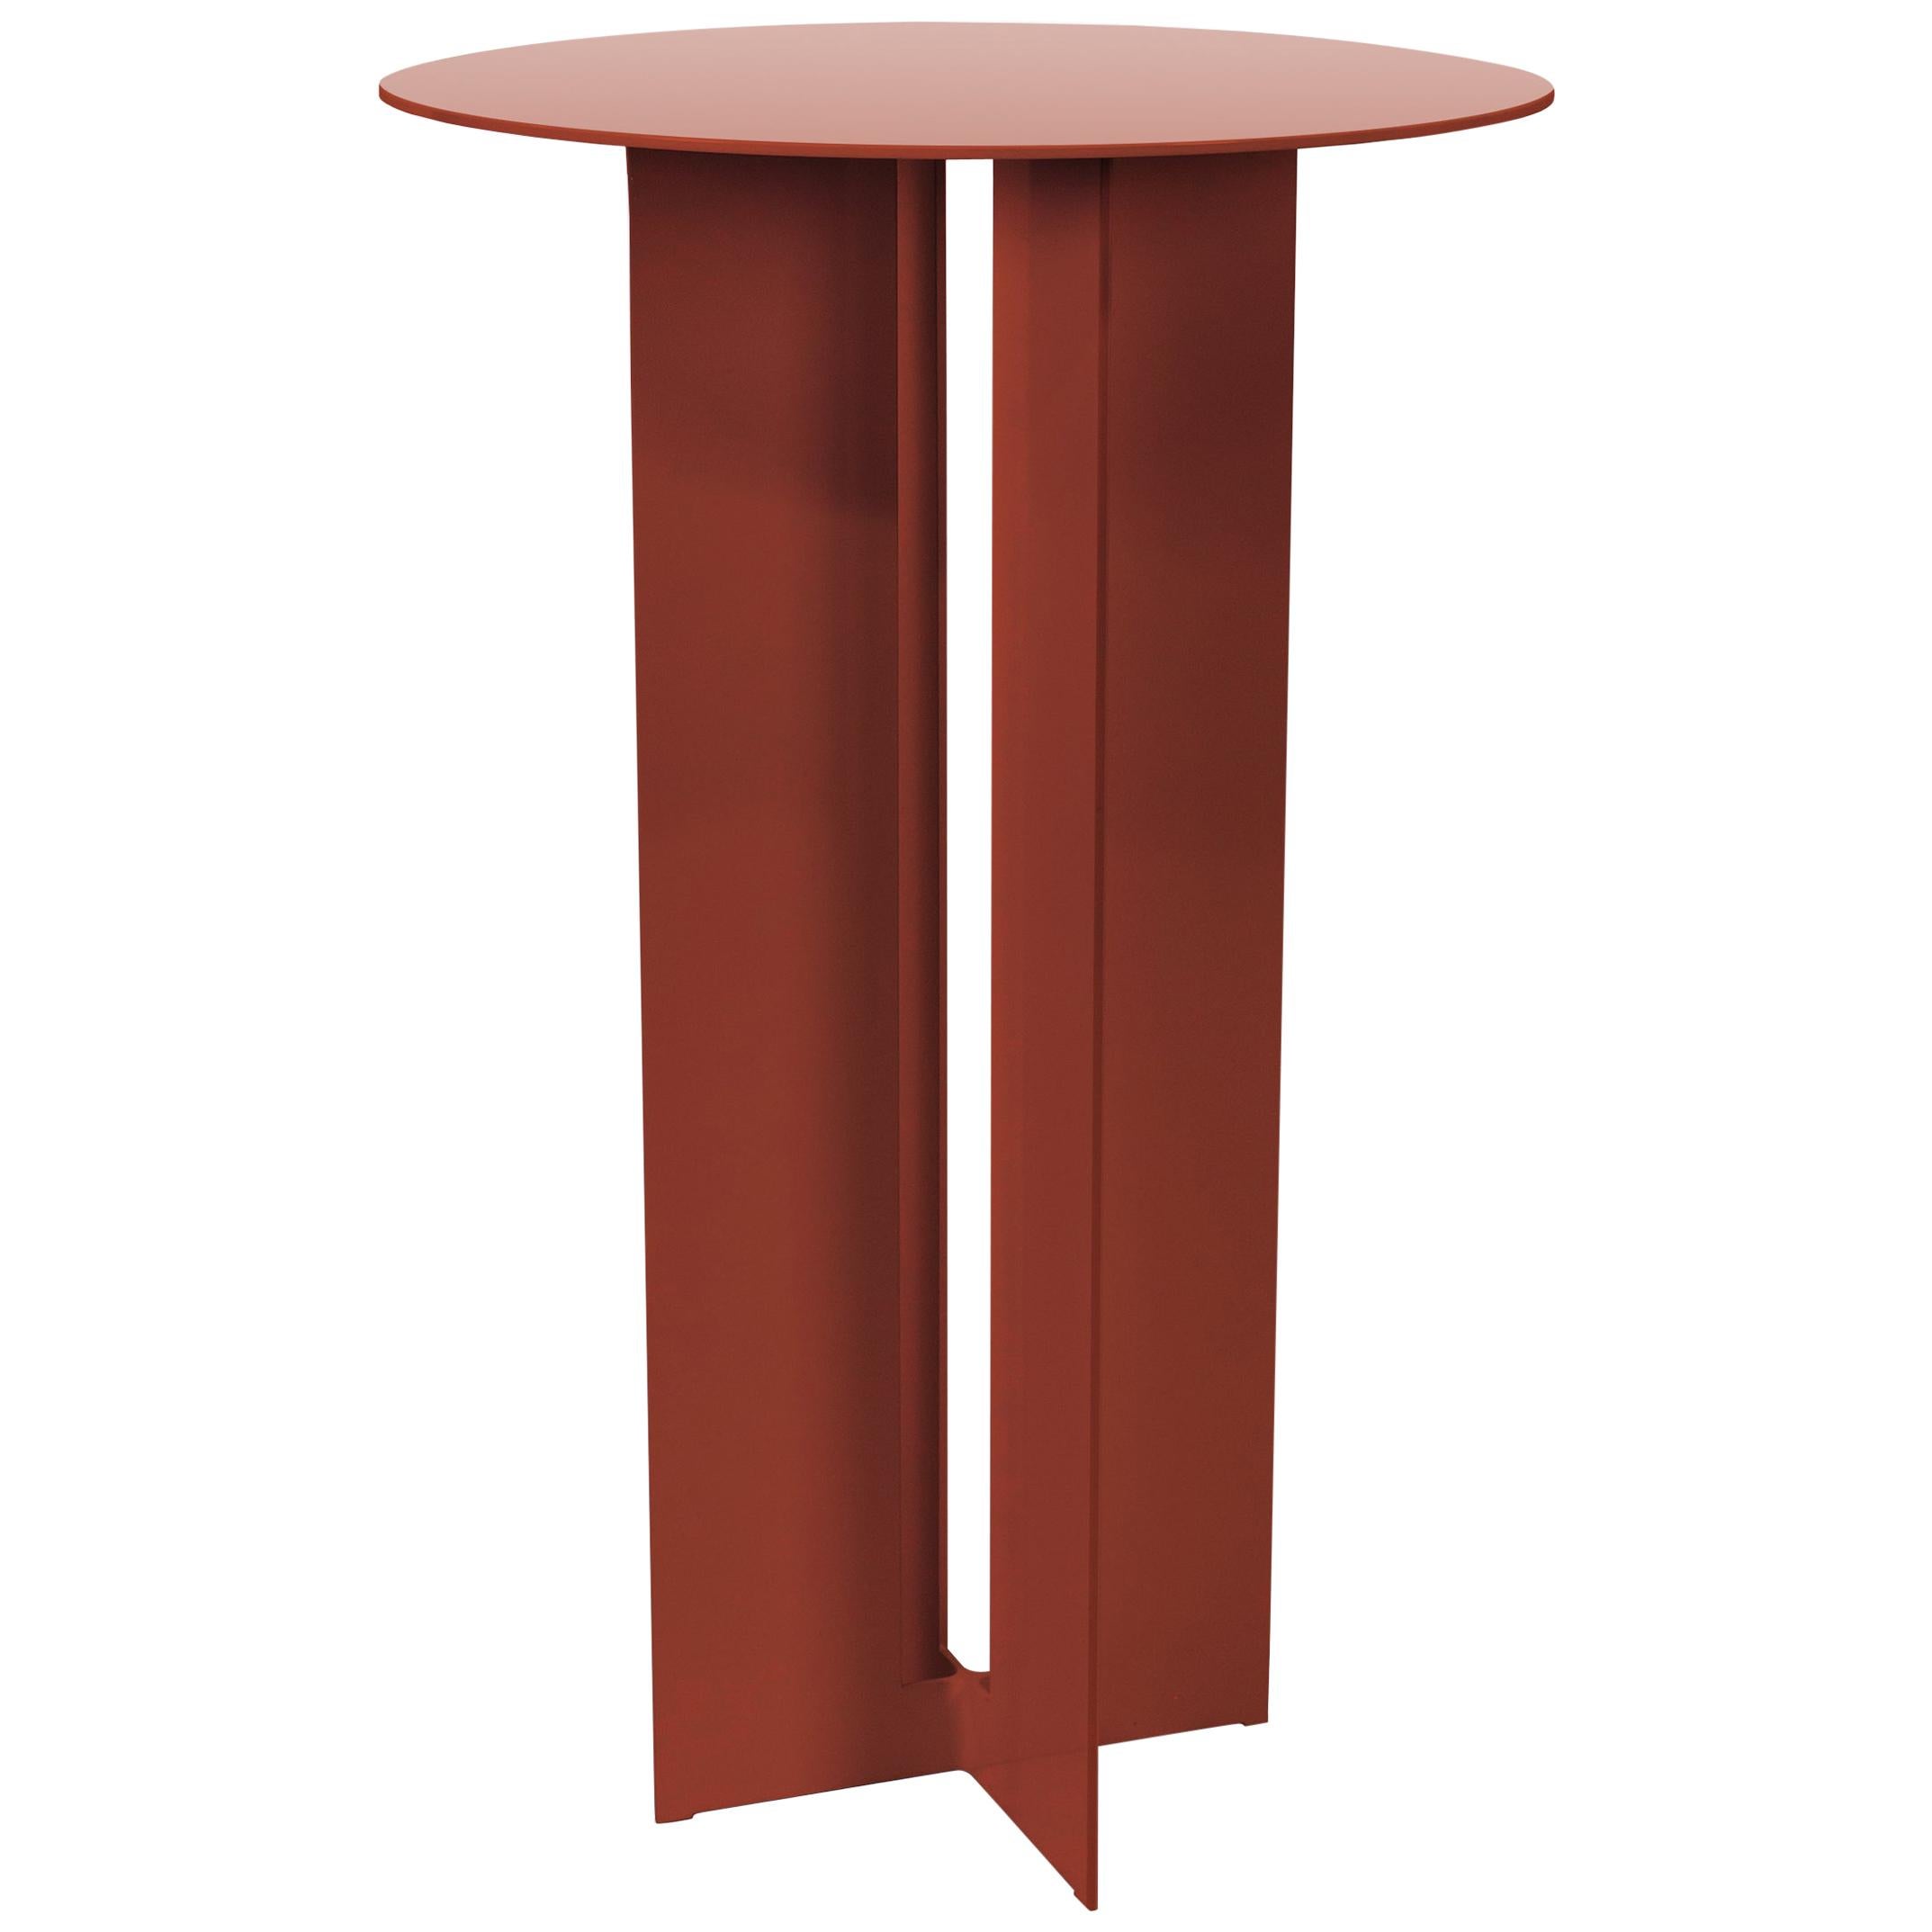 Mers Cafe Table in Ochre Aluminum 